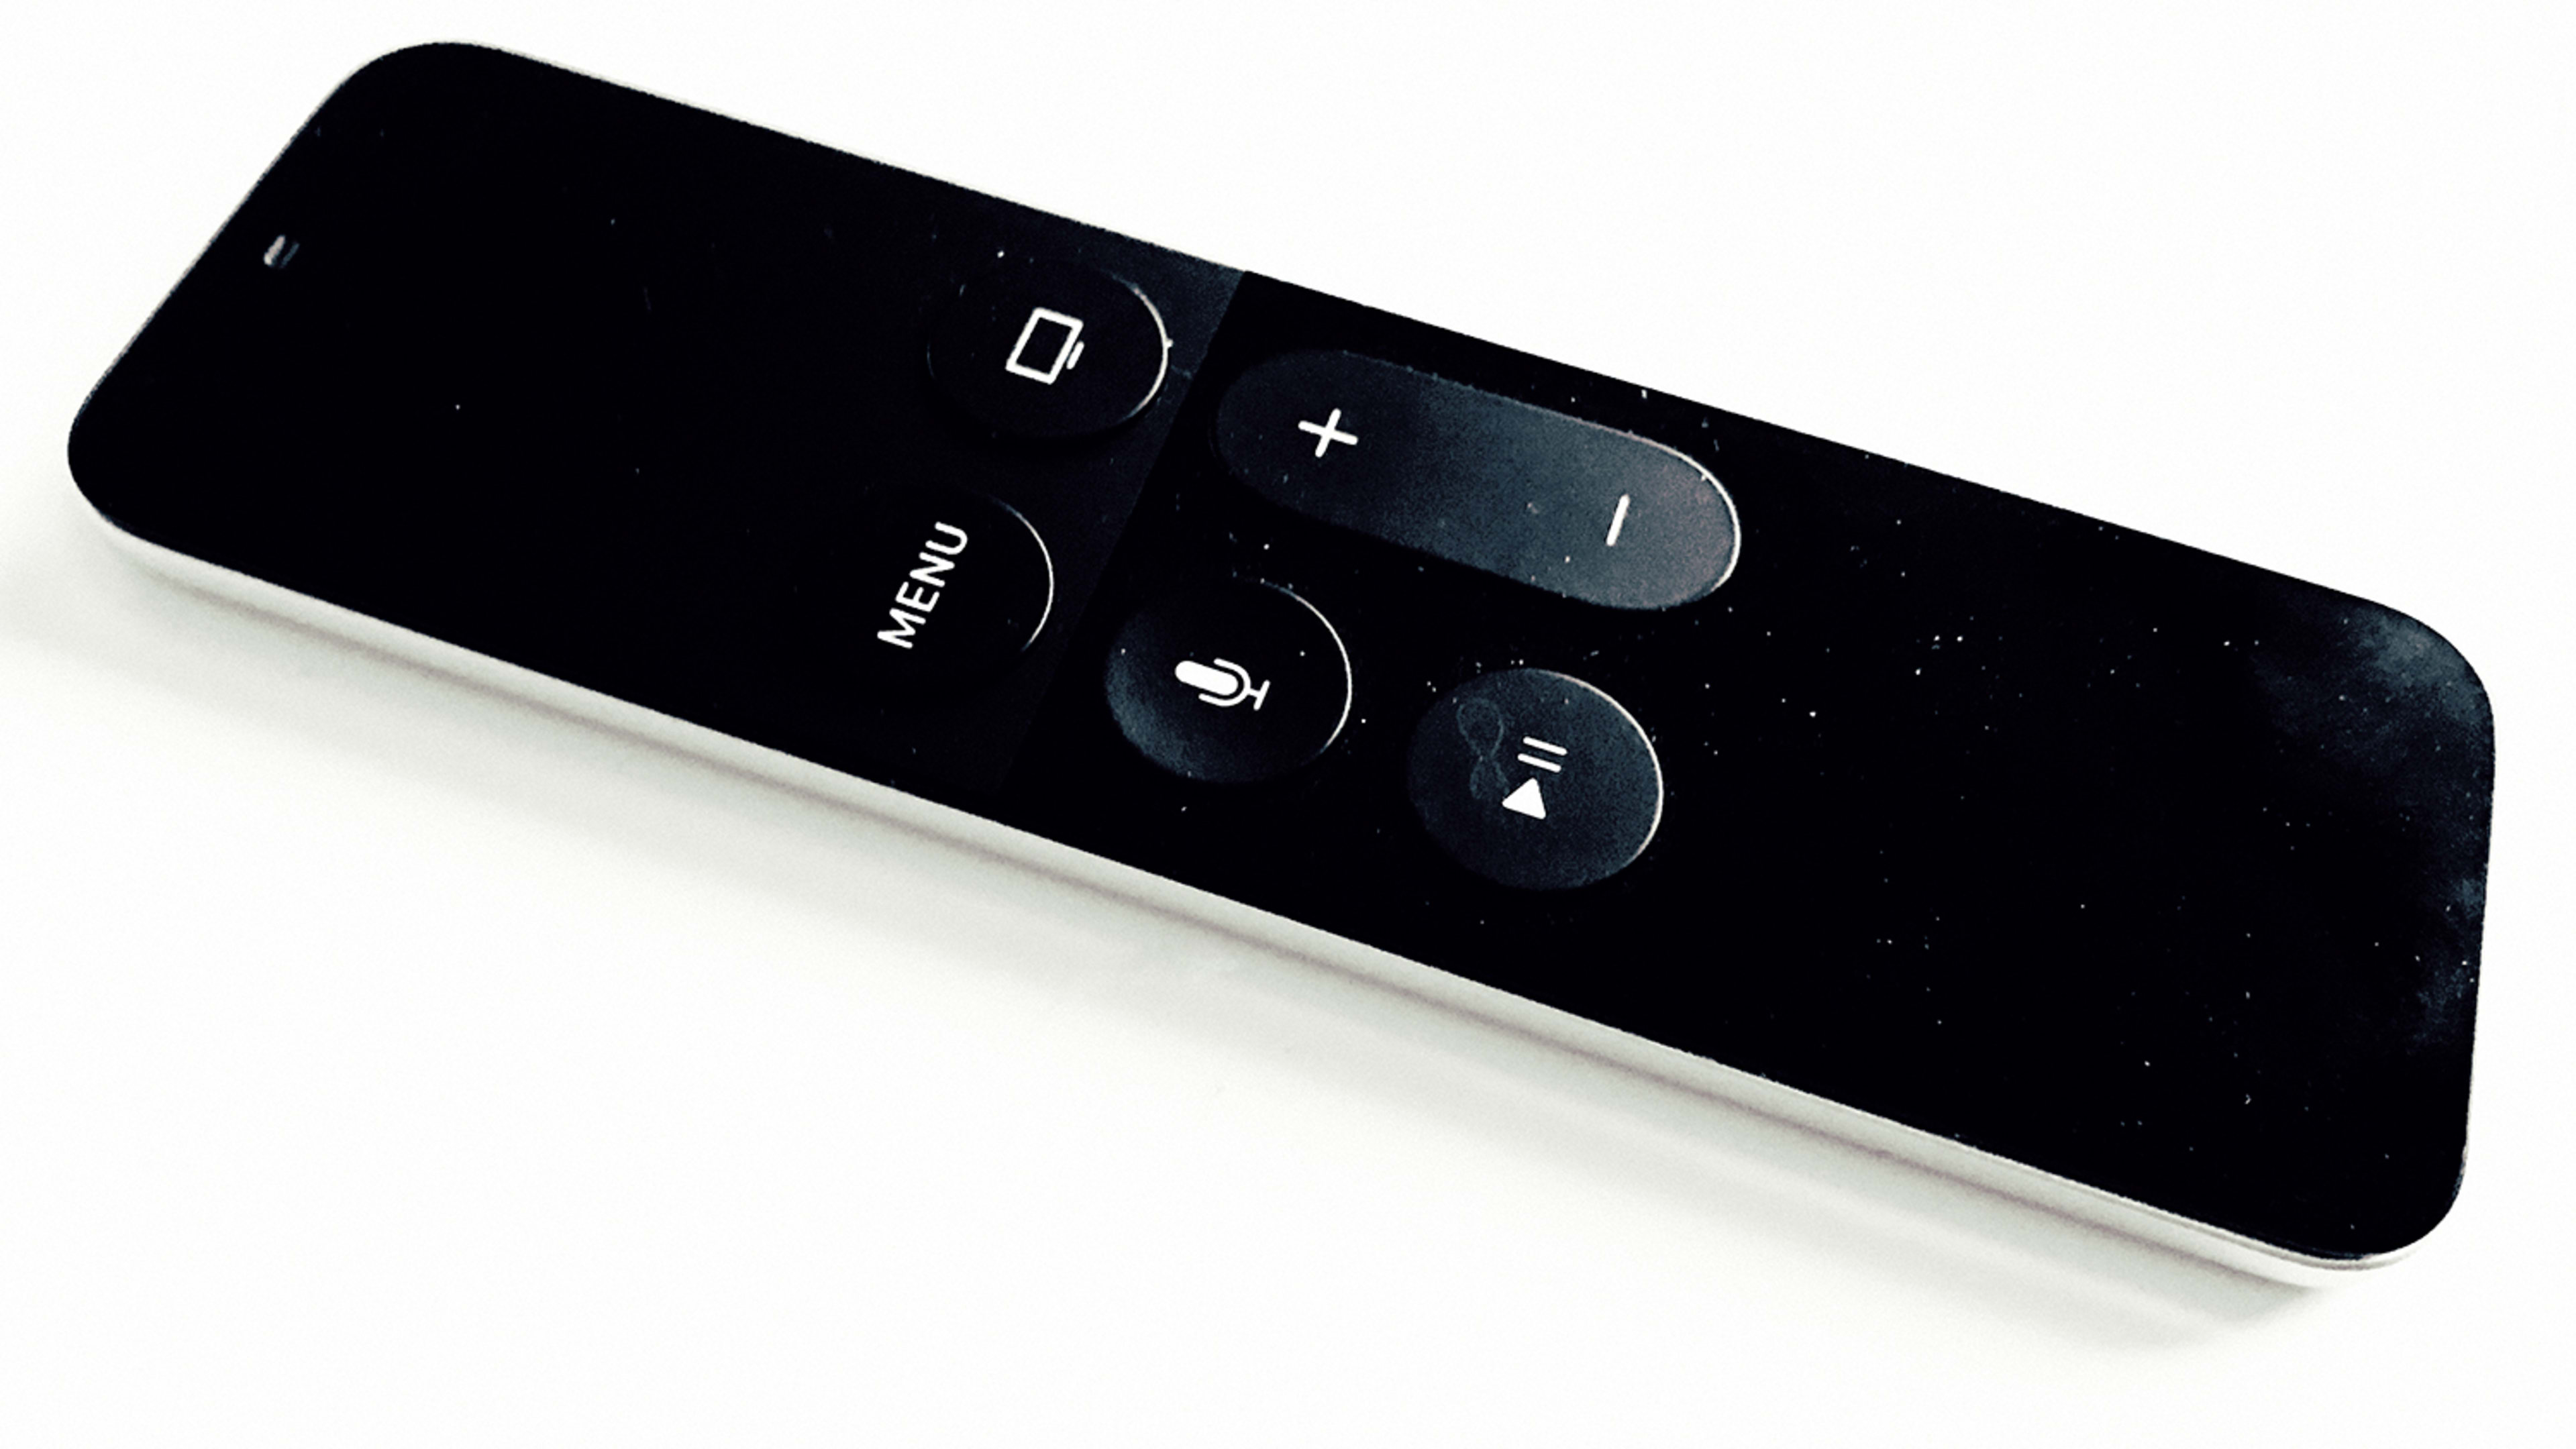 Apple TV will need more than 4K HDR to redeem itself